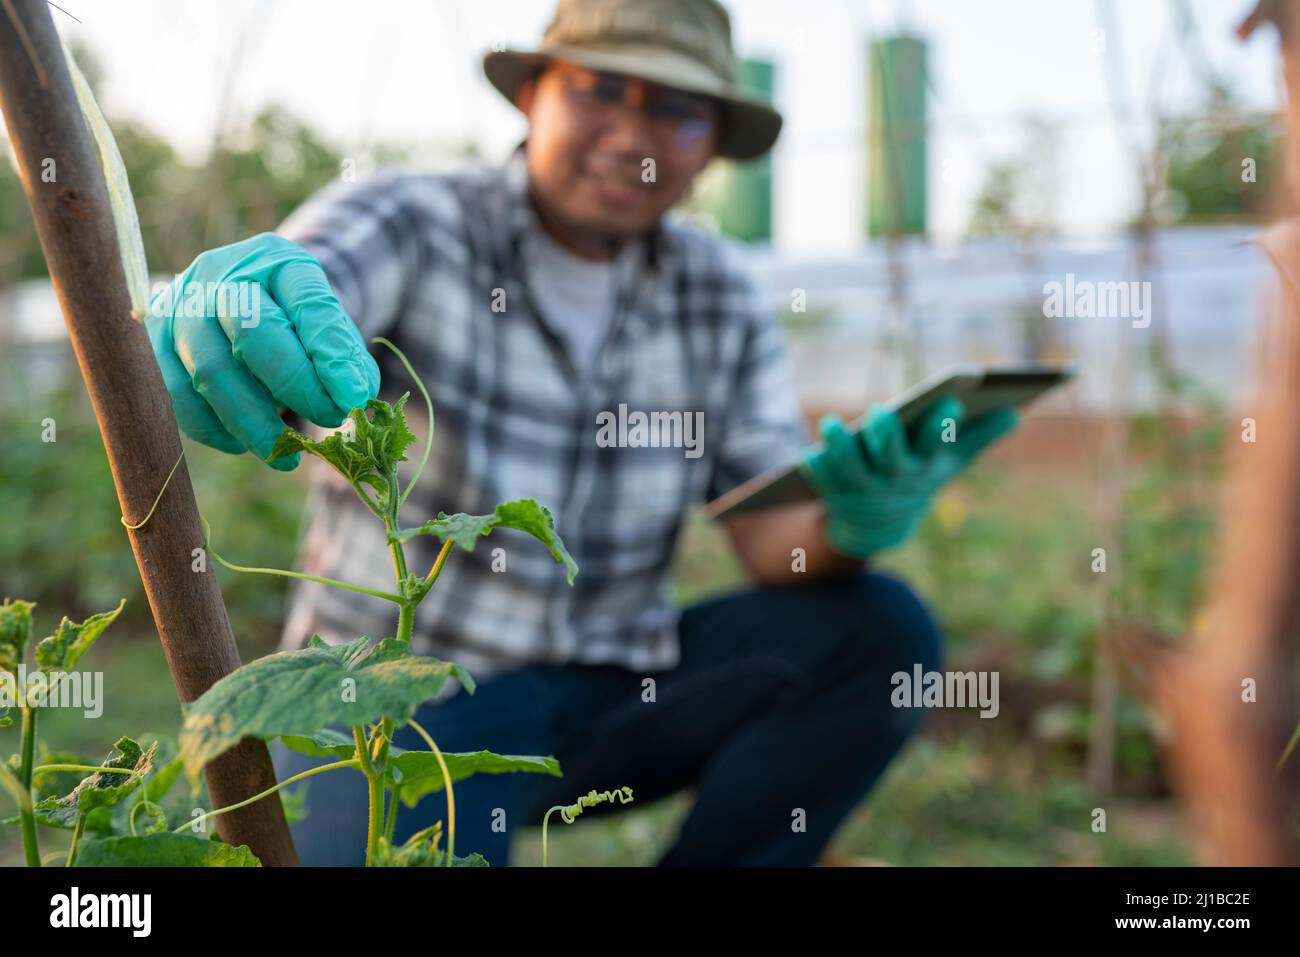 Quality inspection of vegetable gardens in organic vegetable plots that use water from solar or renewable energy Stock Photo